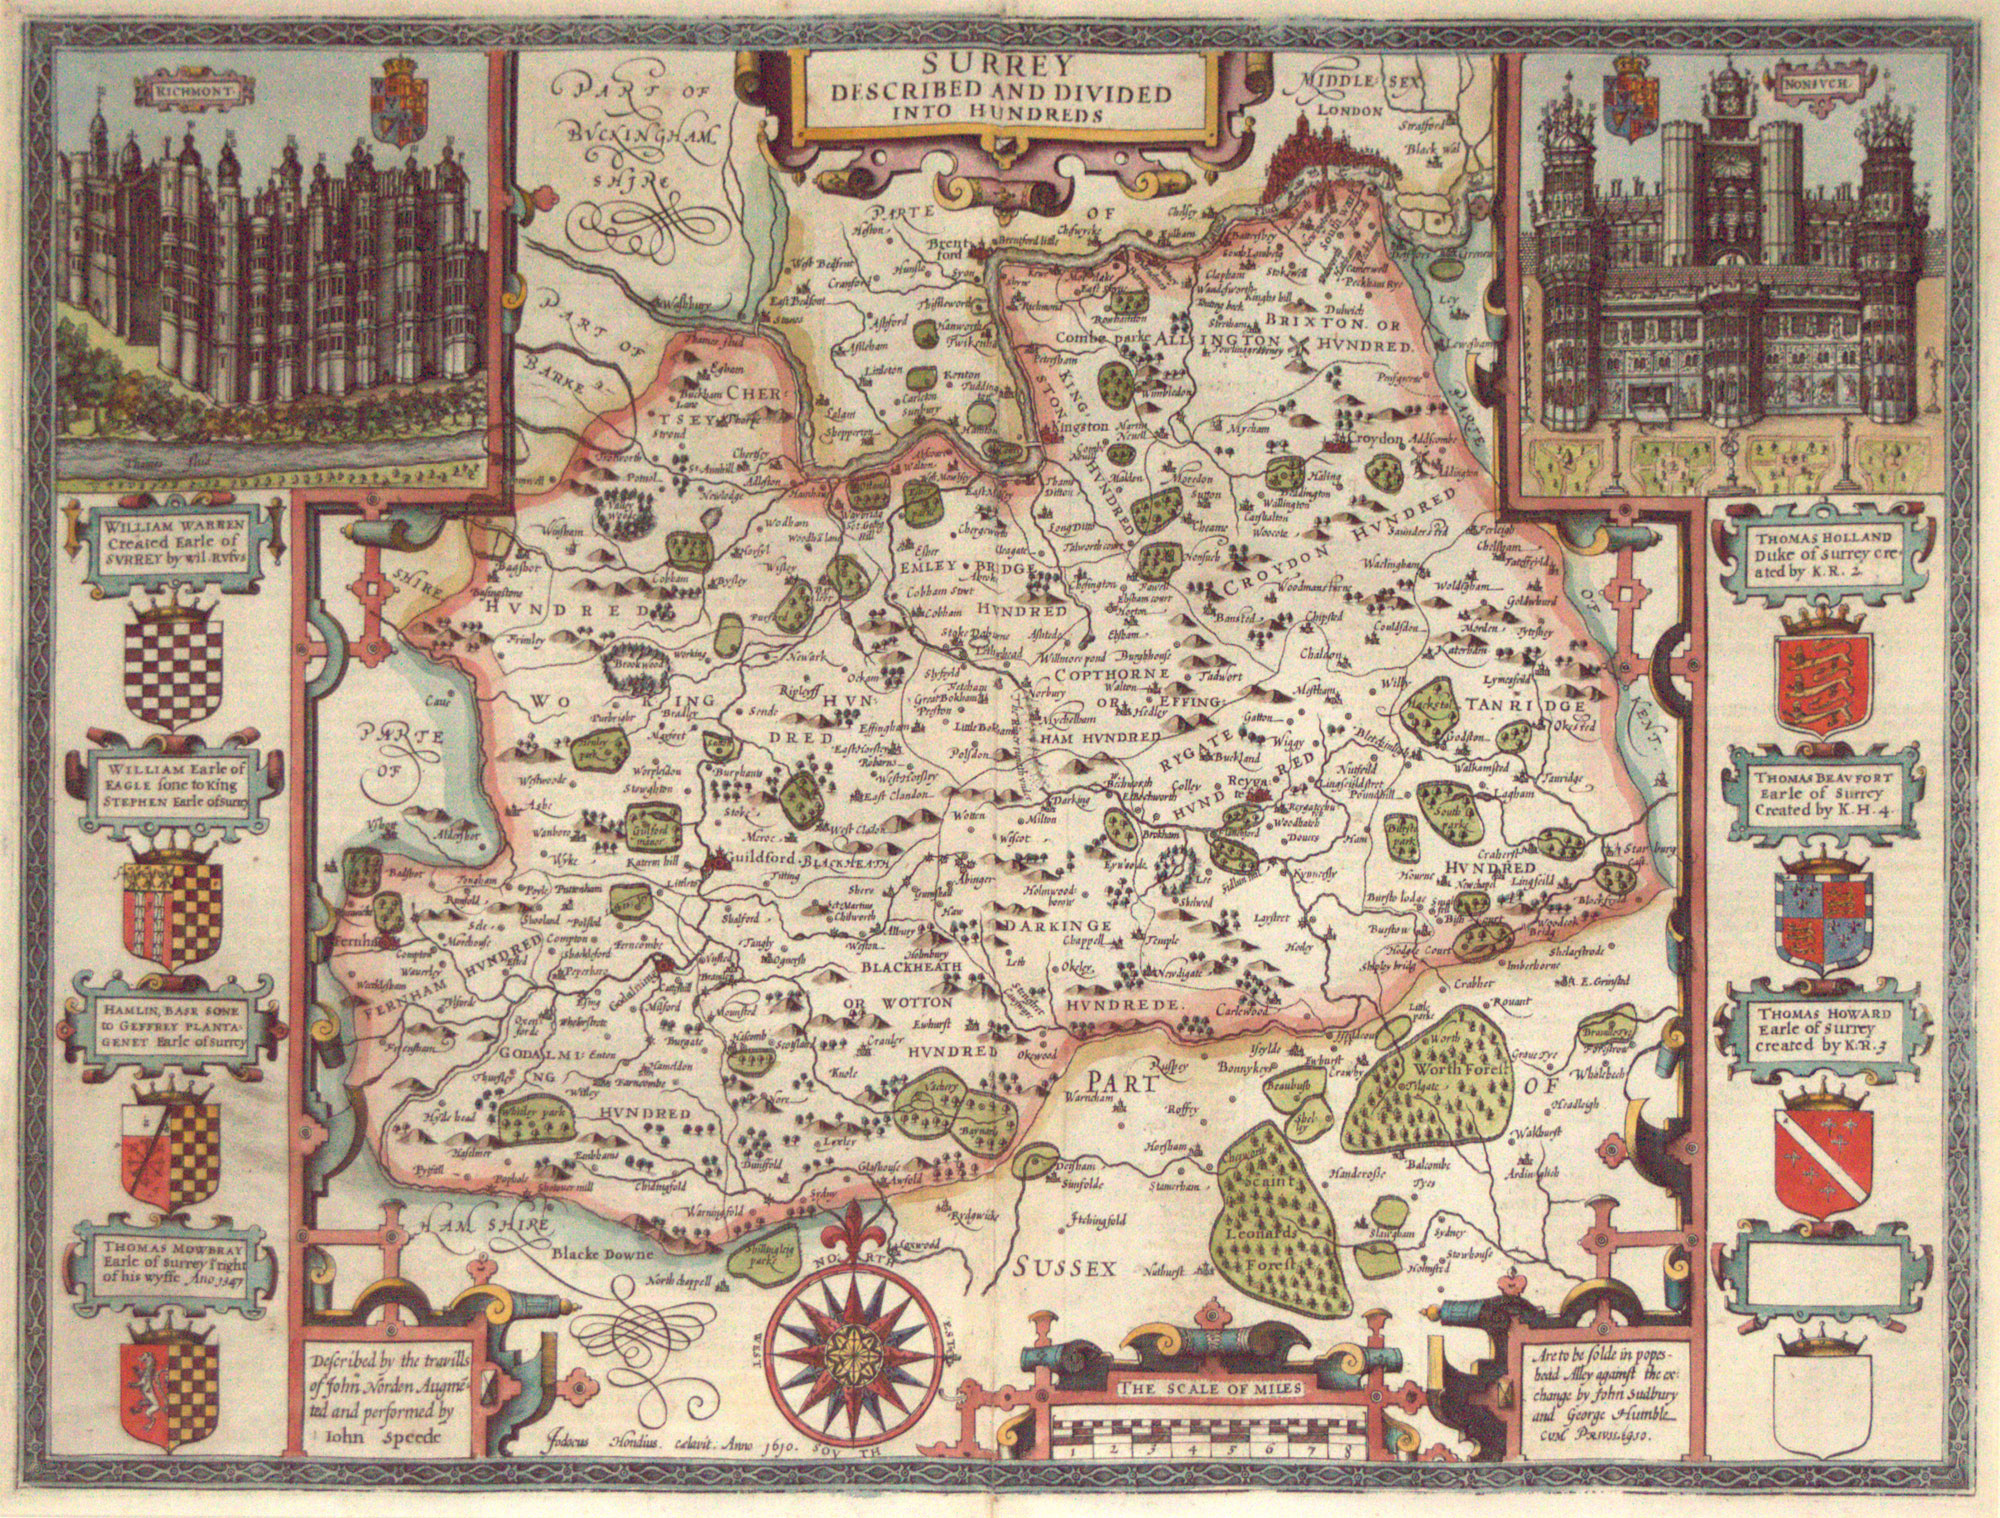 England John Speed 1600's Reprint Details about   Old Antique Collectable Tudor map of Surrey 